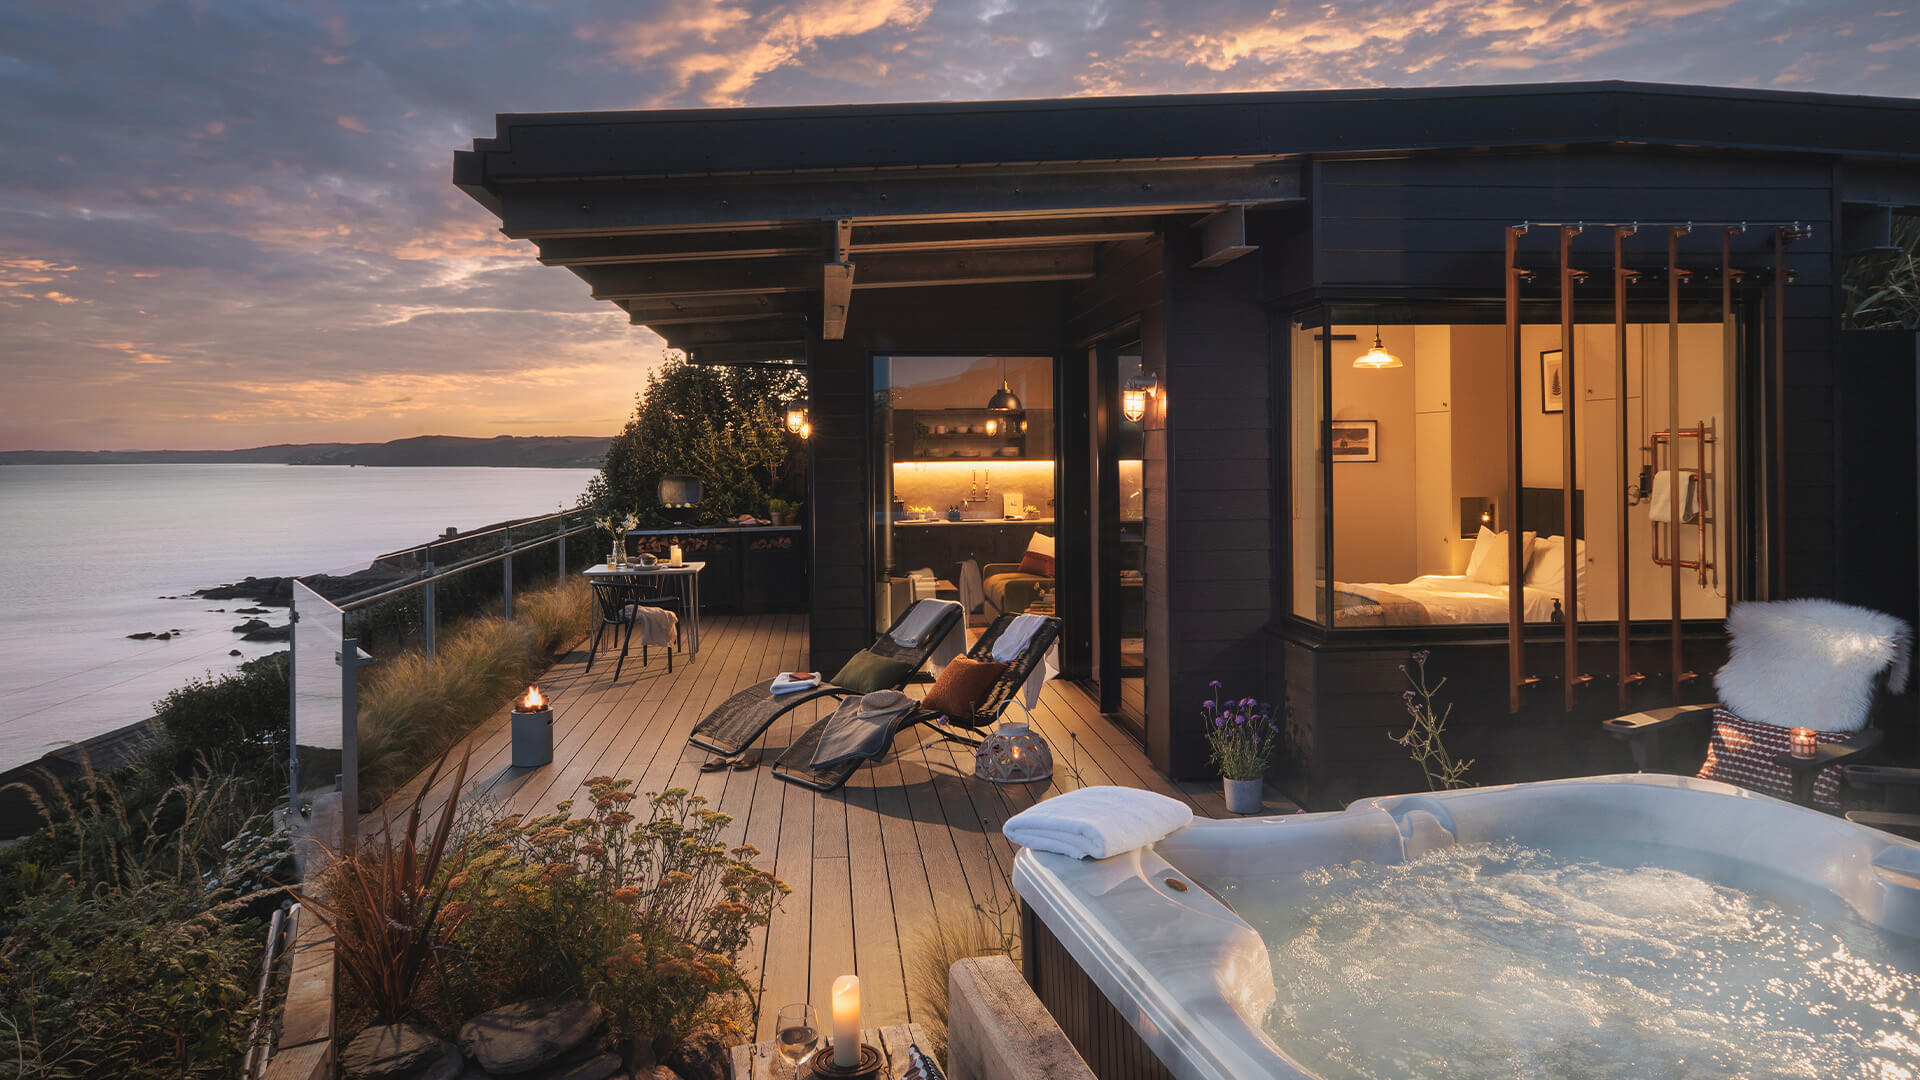 Luxury Balcony Next To Sea With Hot Tub And Loungers